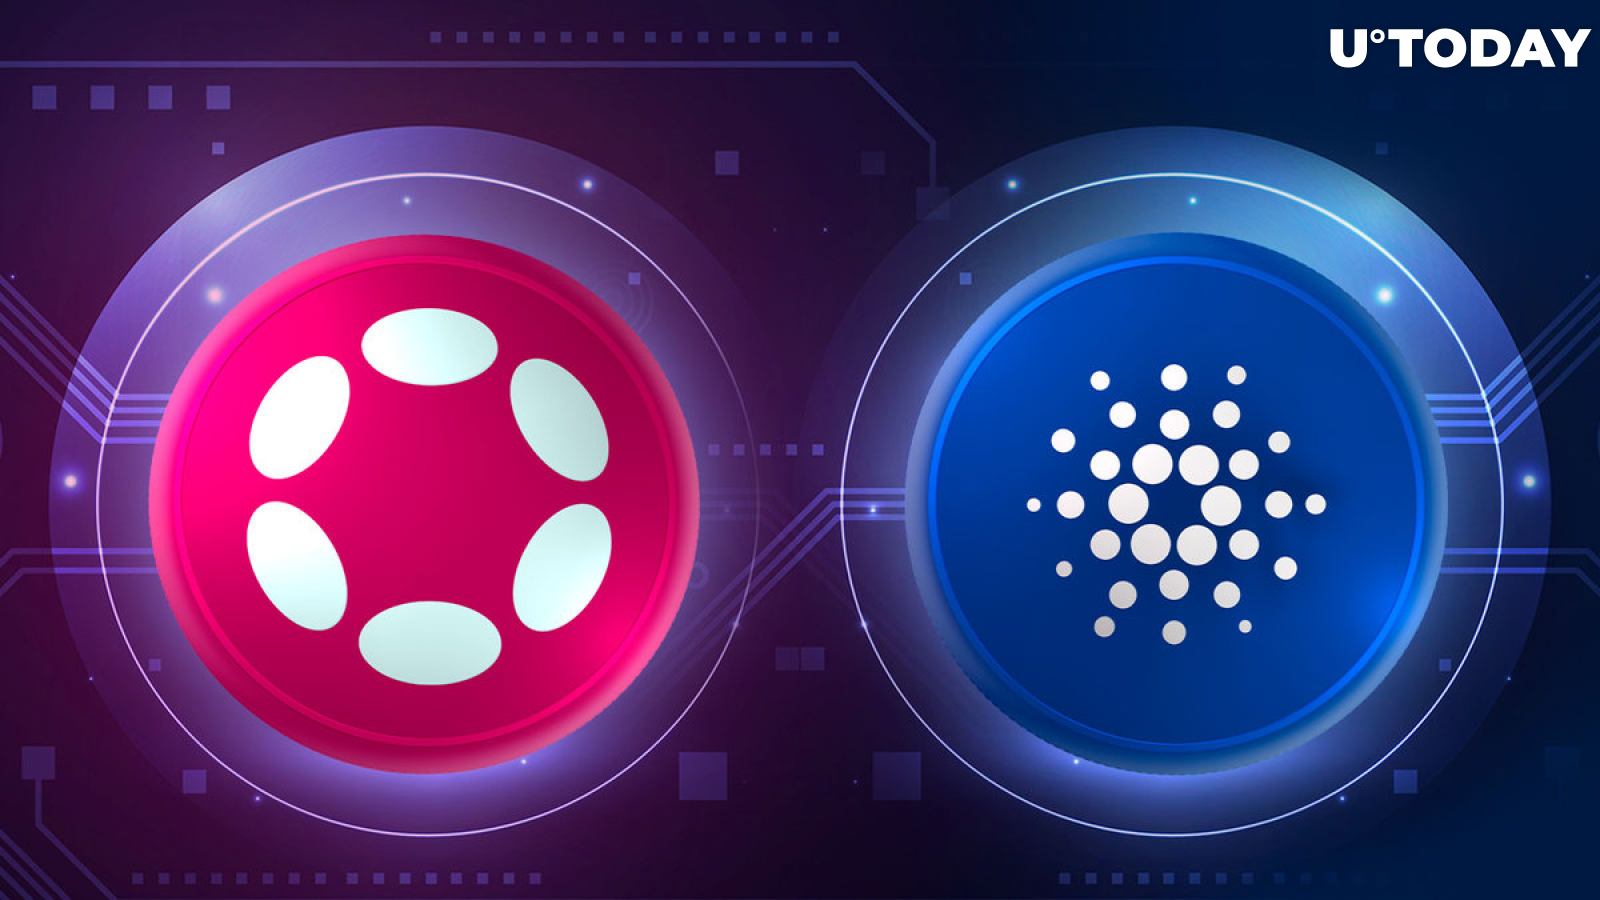 Polkadot (DOT) Makes Cardano Announcement, What Does It Relate To?